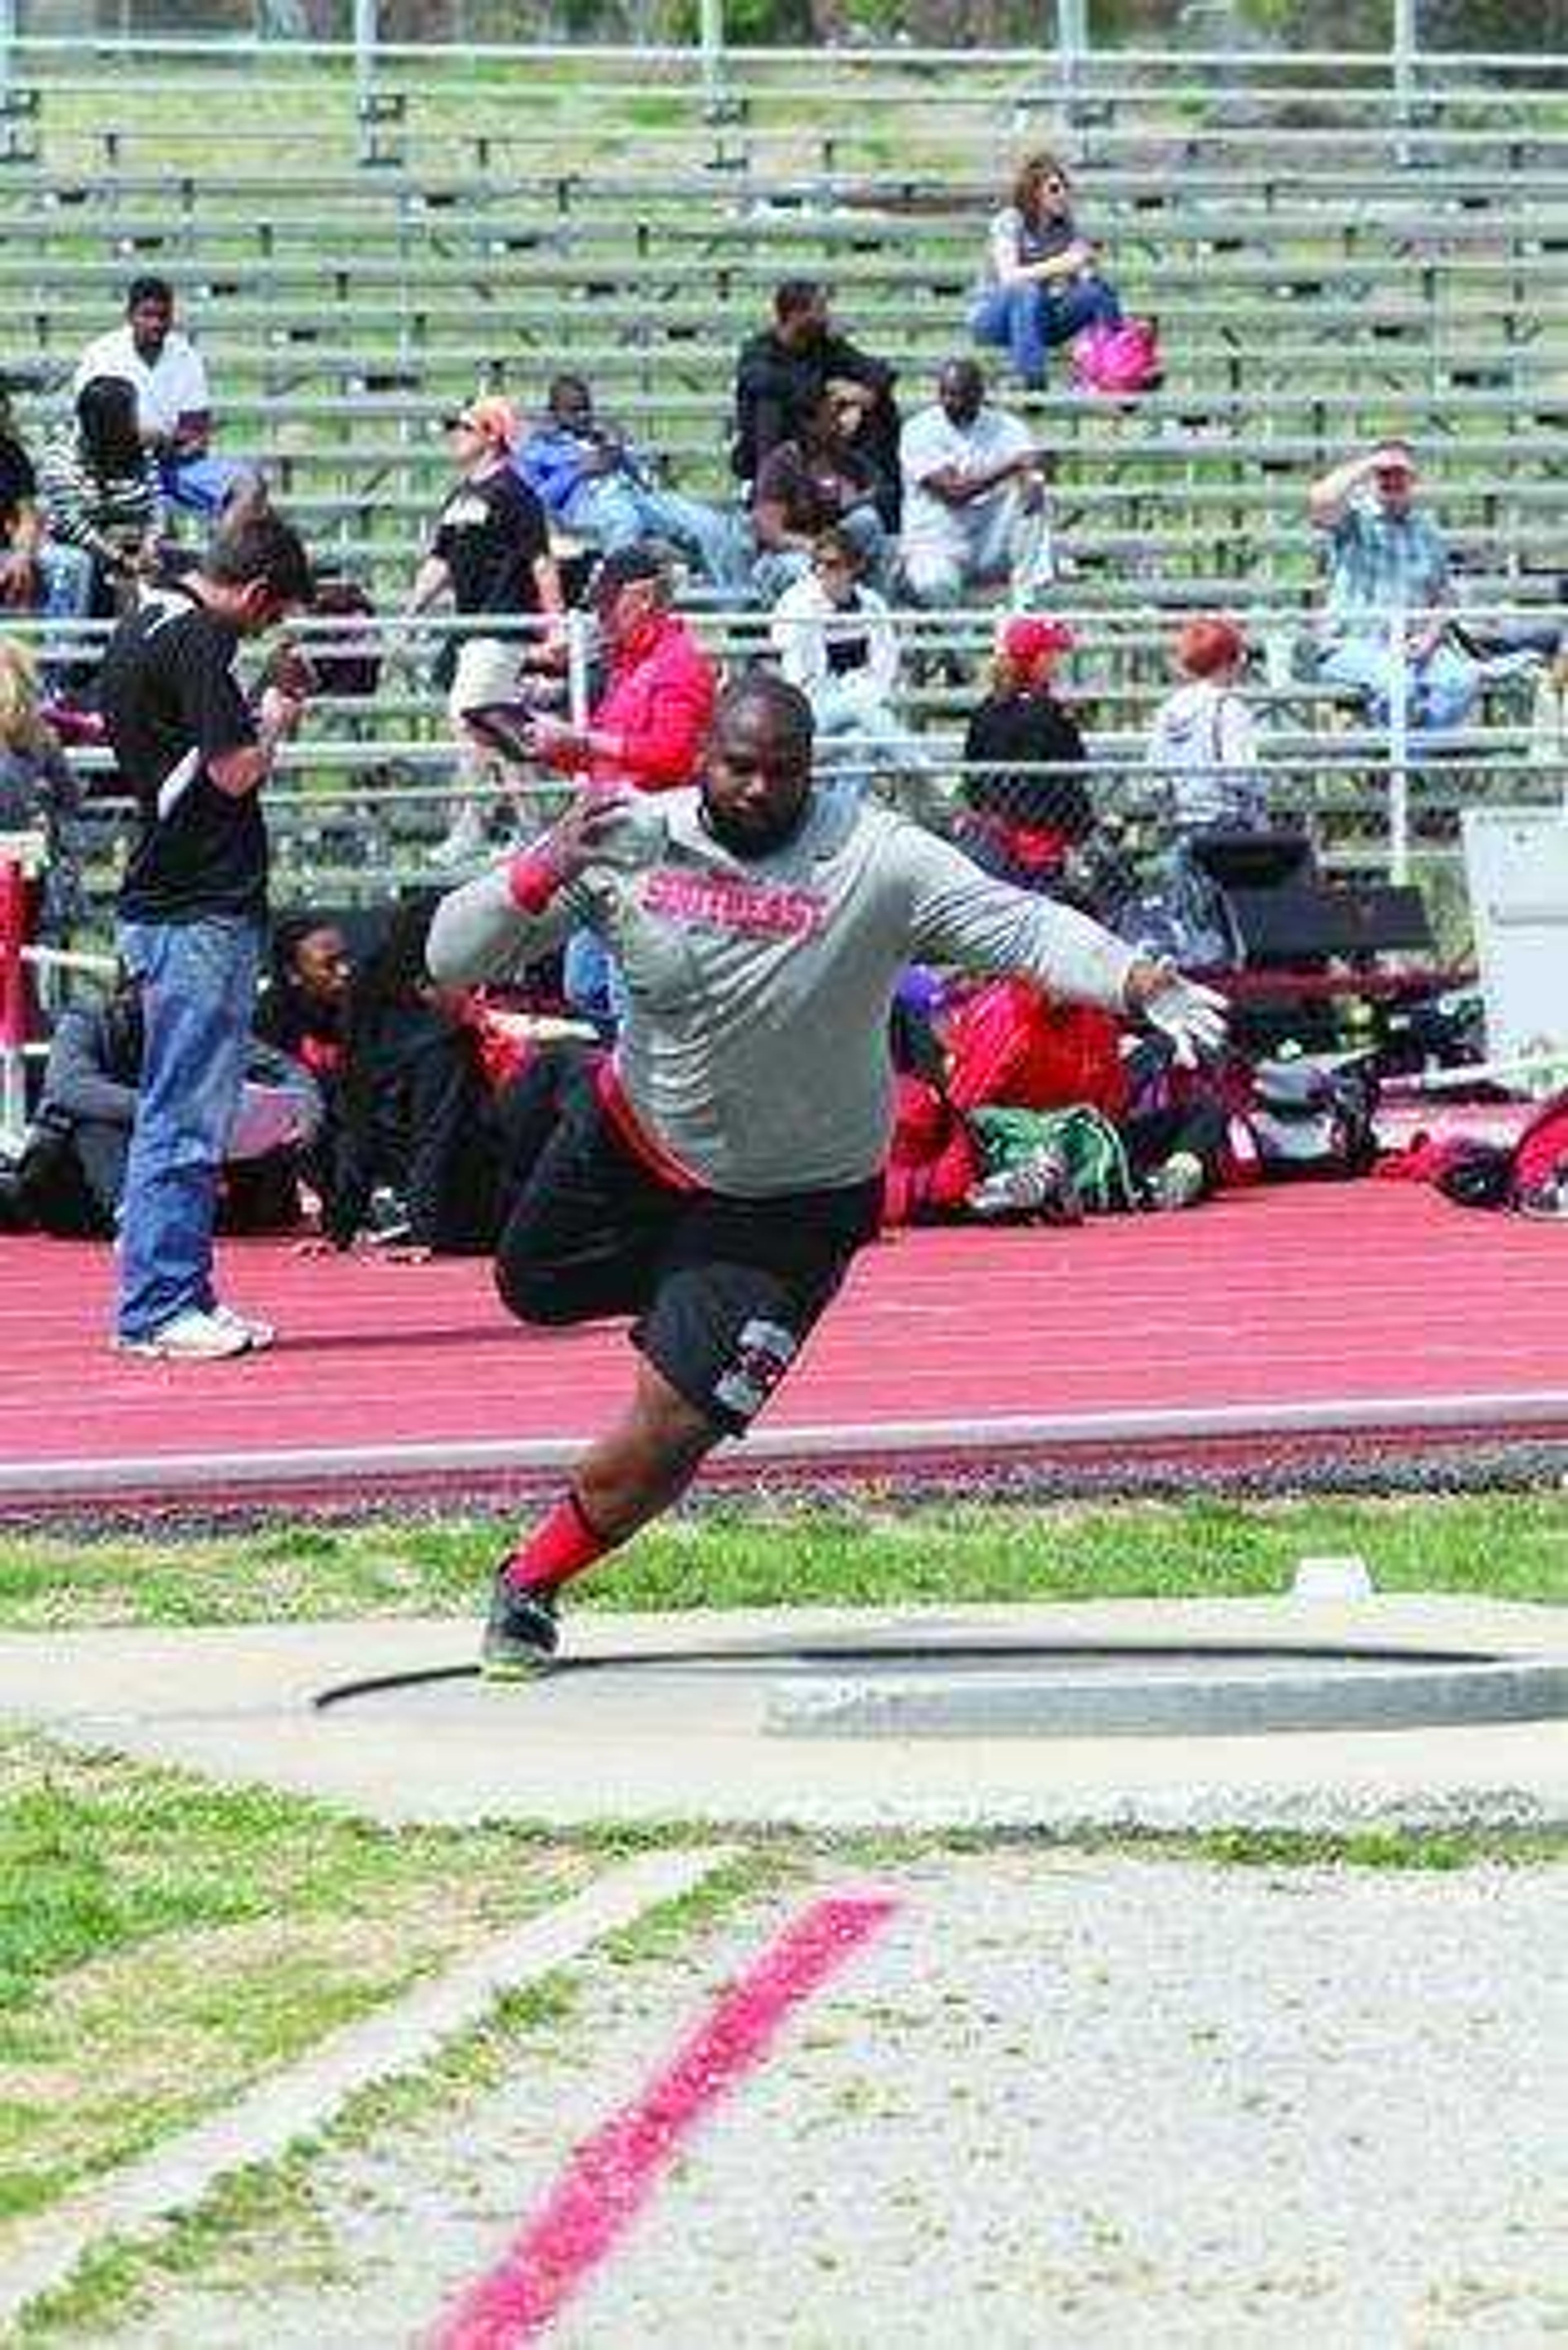 Southeast senior thrower Craig Robinson competes in the shot put. Photo submitted by Marc Mahnke